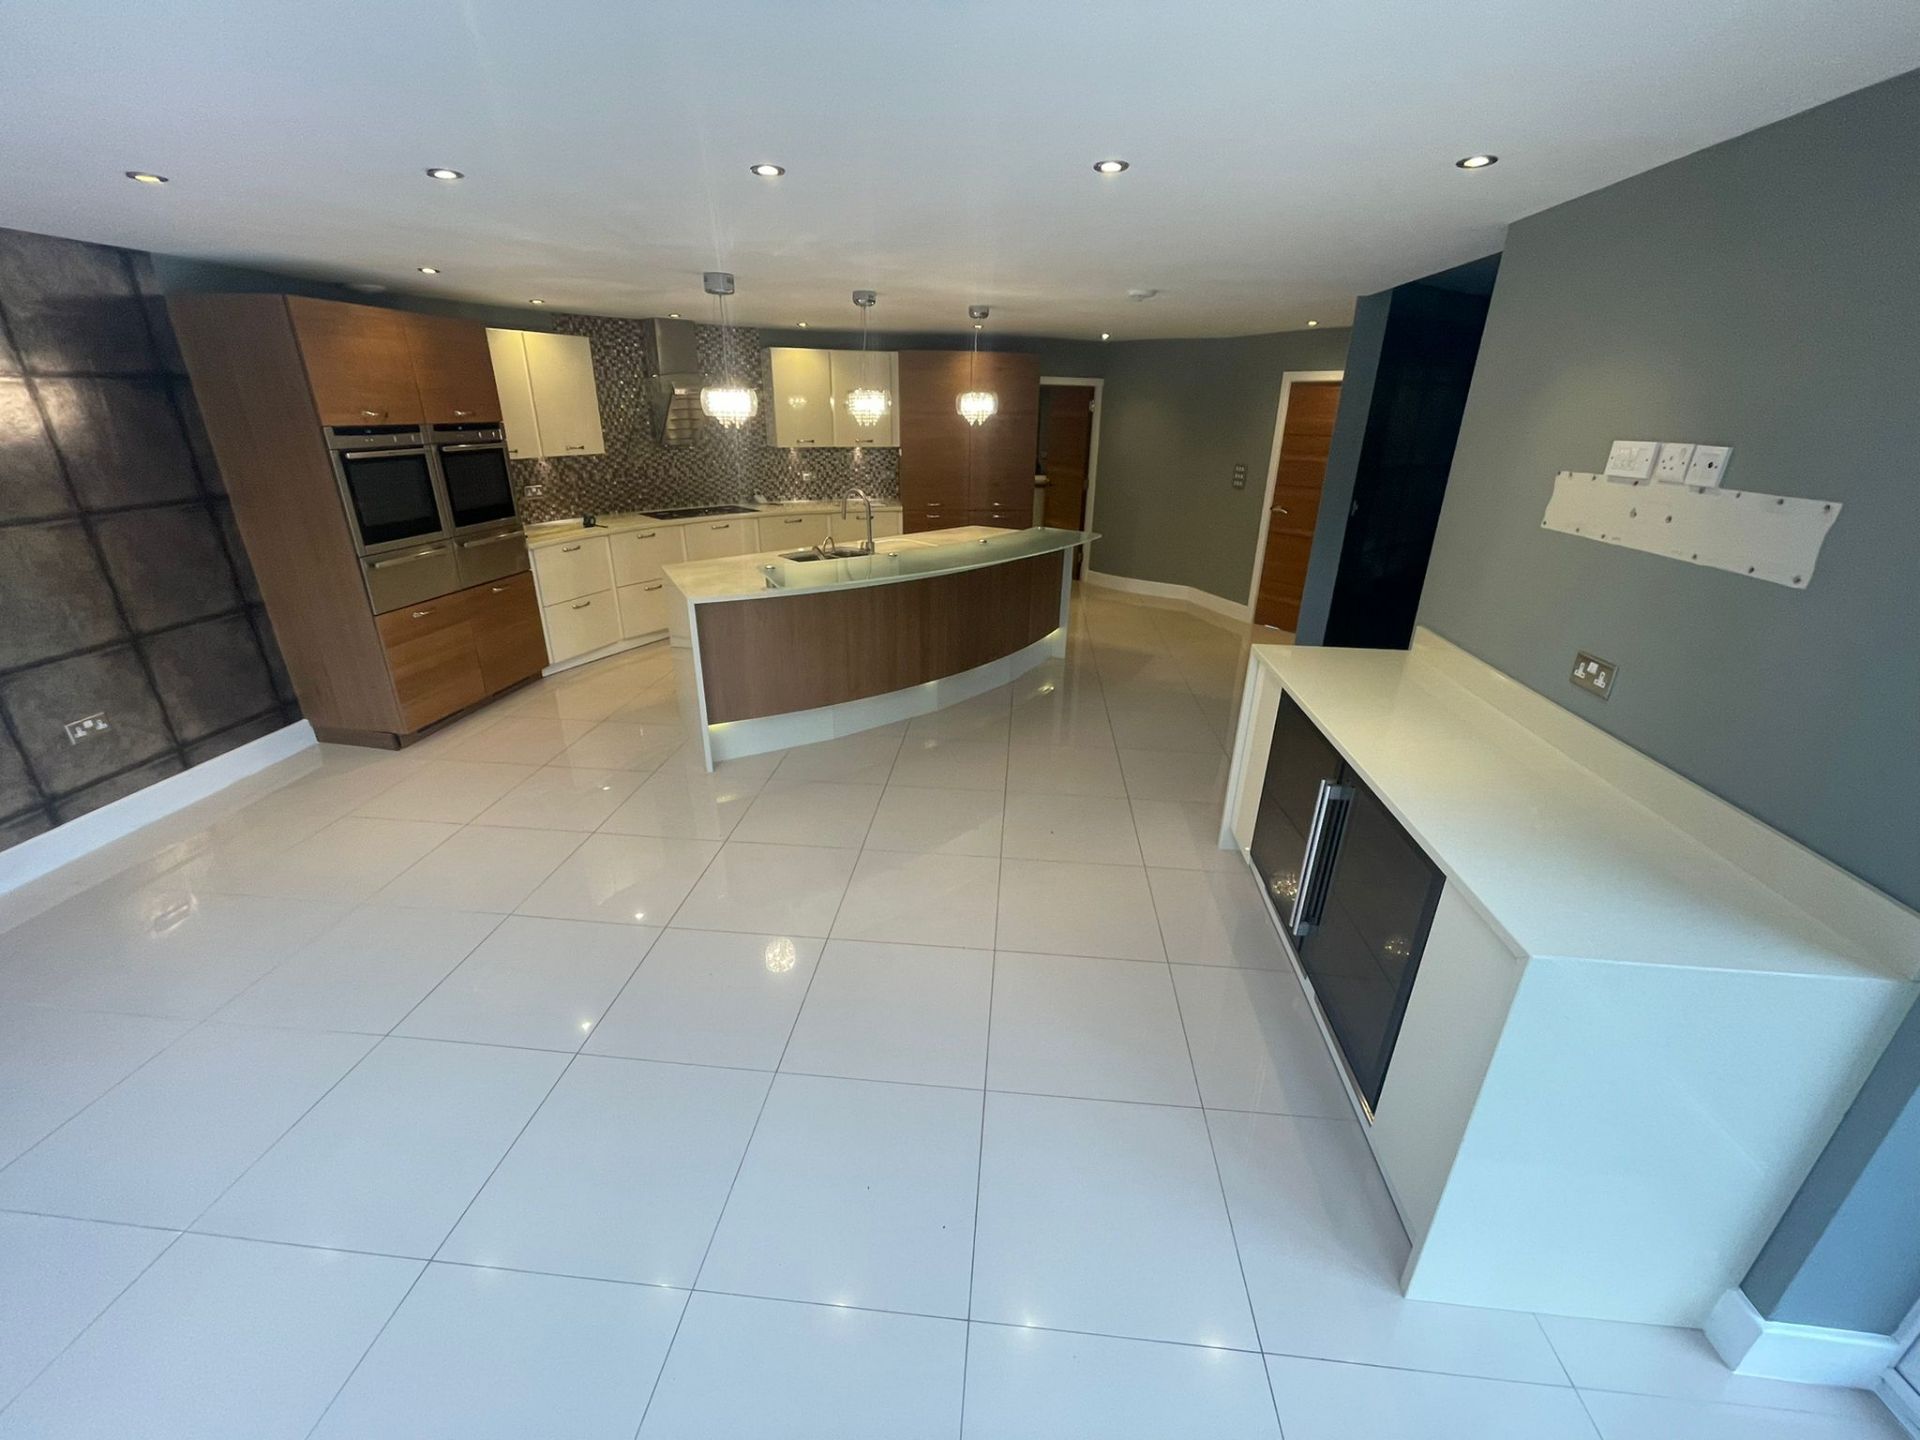 1 x Contemporary ALNO Fitted Kitchen With Branded  Appliances Created By Award Winning Kitchen - Image 69 of 89